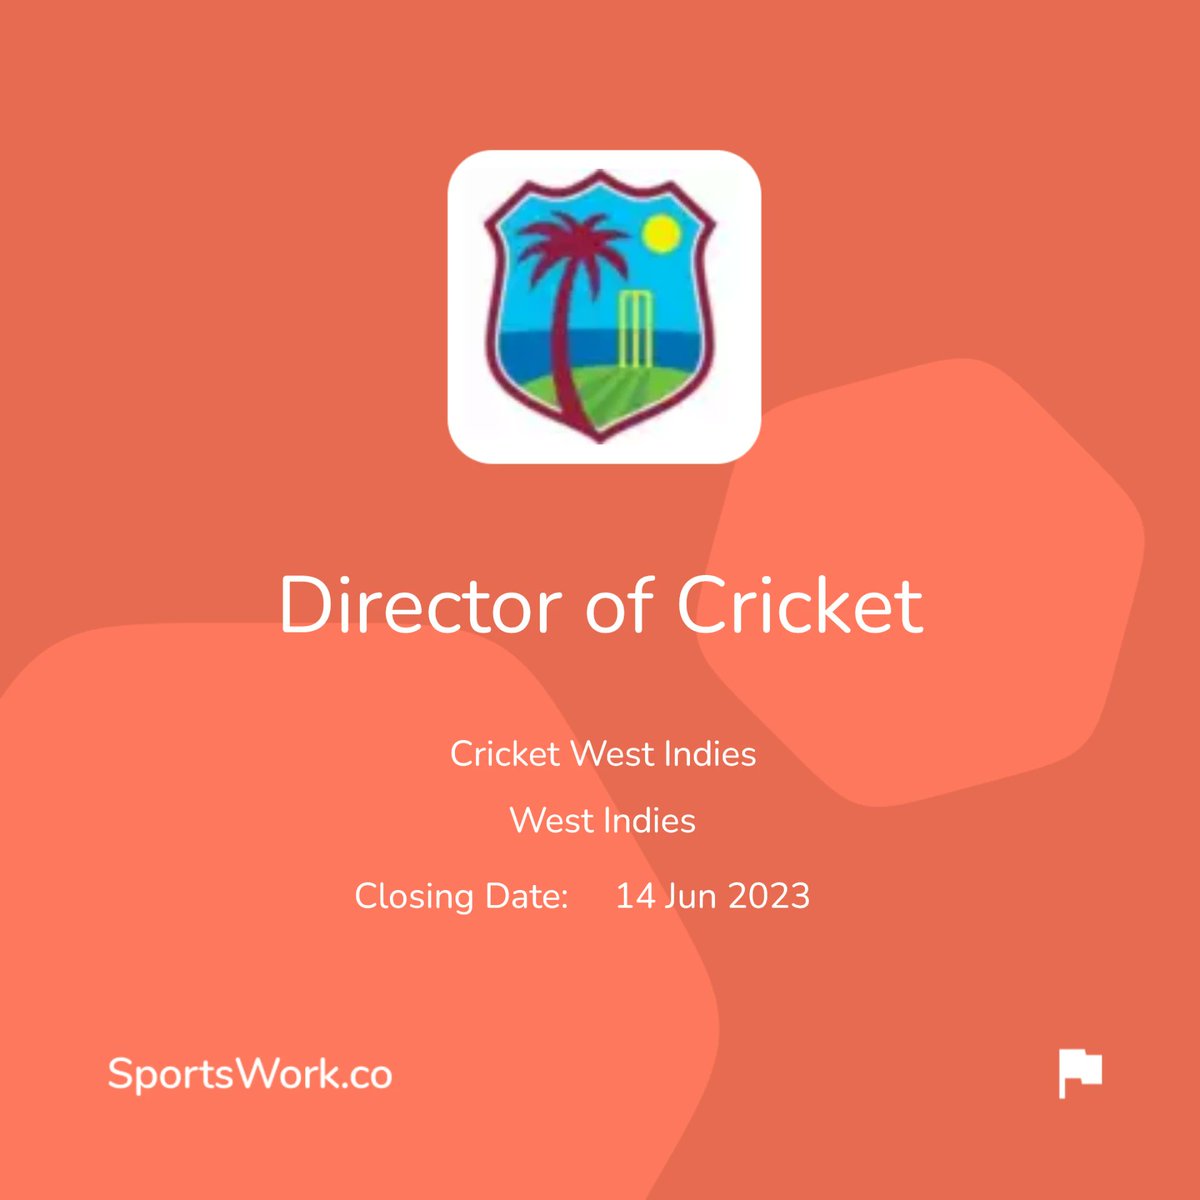 ⭐️  New Vacancy

🏝️ Cricket West Indies

🏏 Director of Cricket

📍  West Indies

More information can be found here - sportswork.co/jobs/cricket-w…

#sportswork #sportsjobs #workinsport #WestIndies #cricket